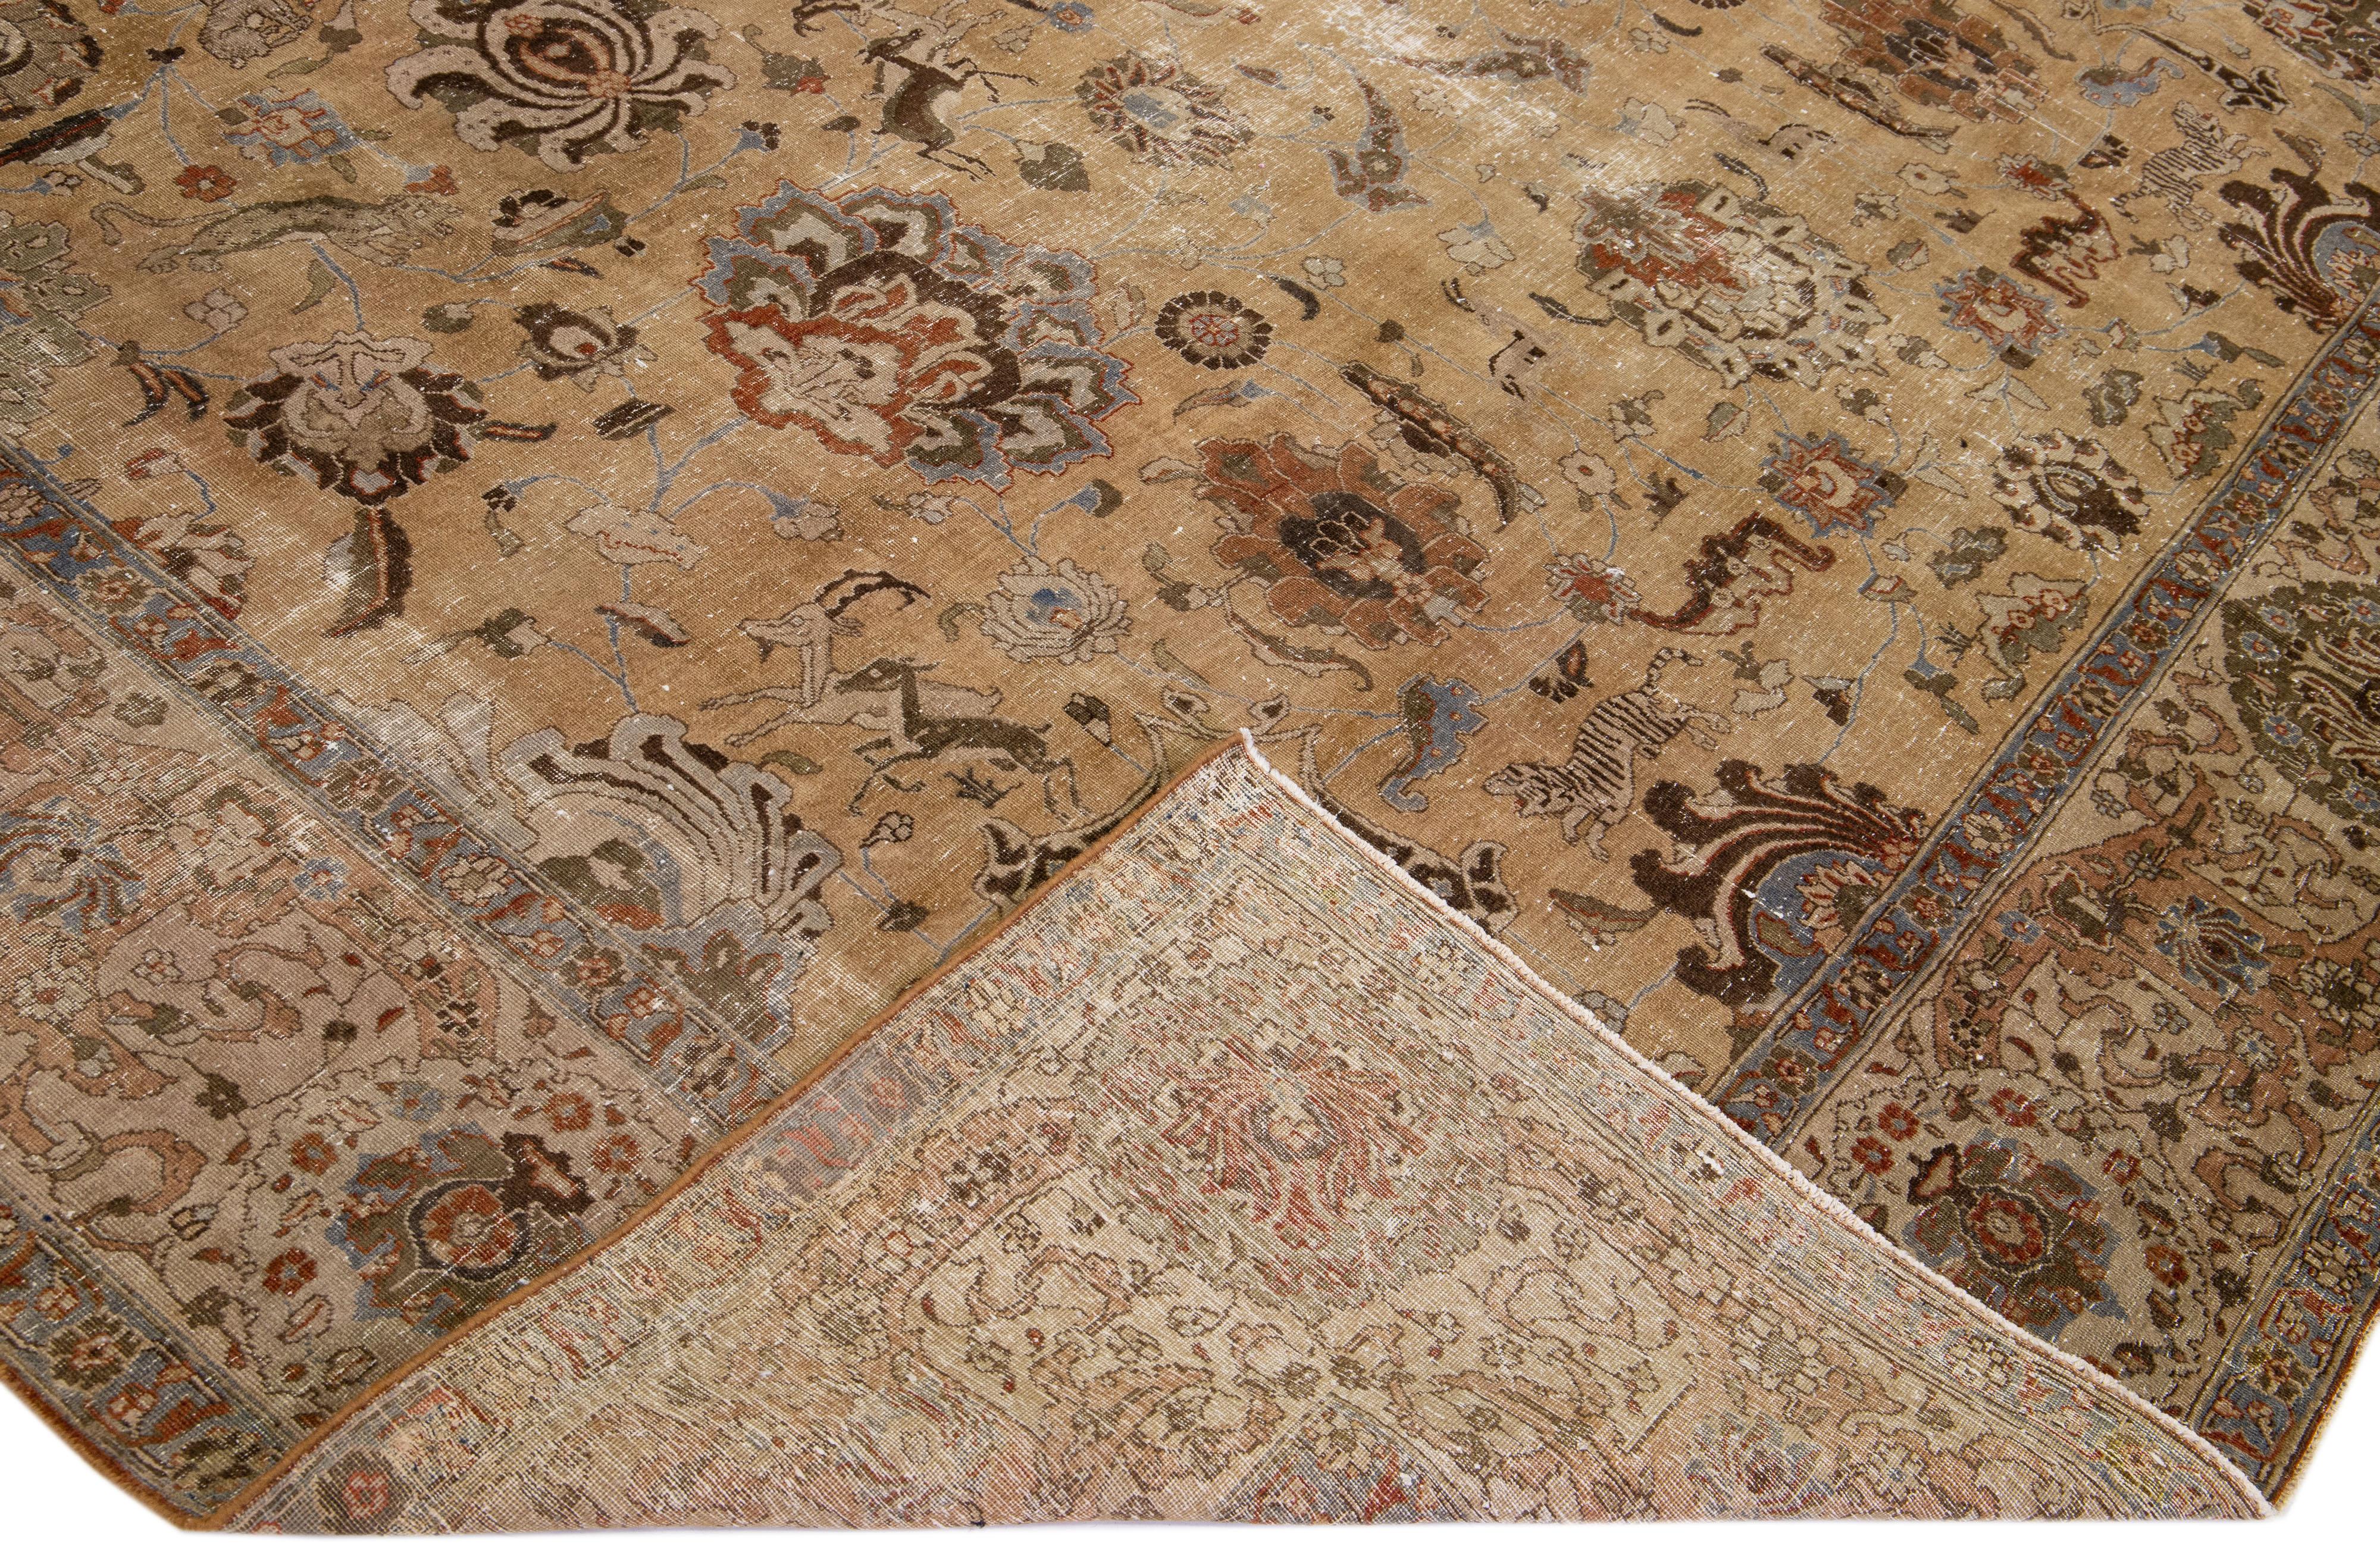 Beautiful antique Tabriz hand-knotted wool rug with a brown color field. This Persian rug has blue, green, and rust accents in a gorgeous all-over floral design.

This rug measures: 11'5